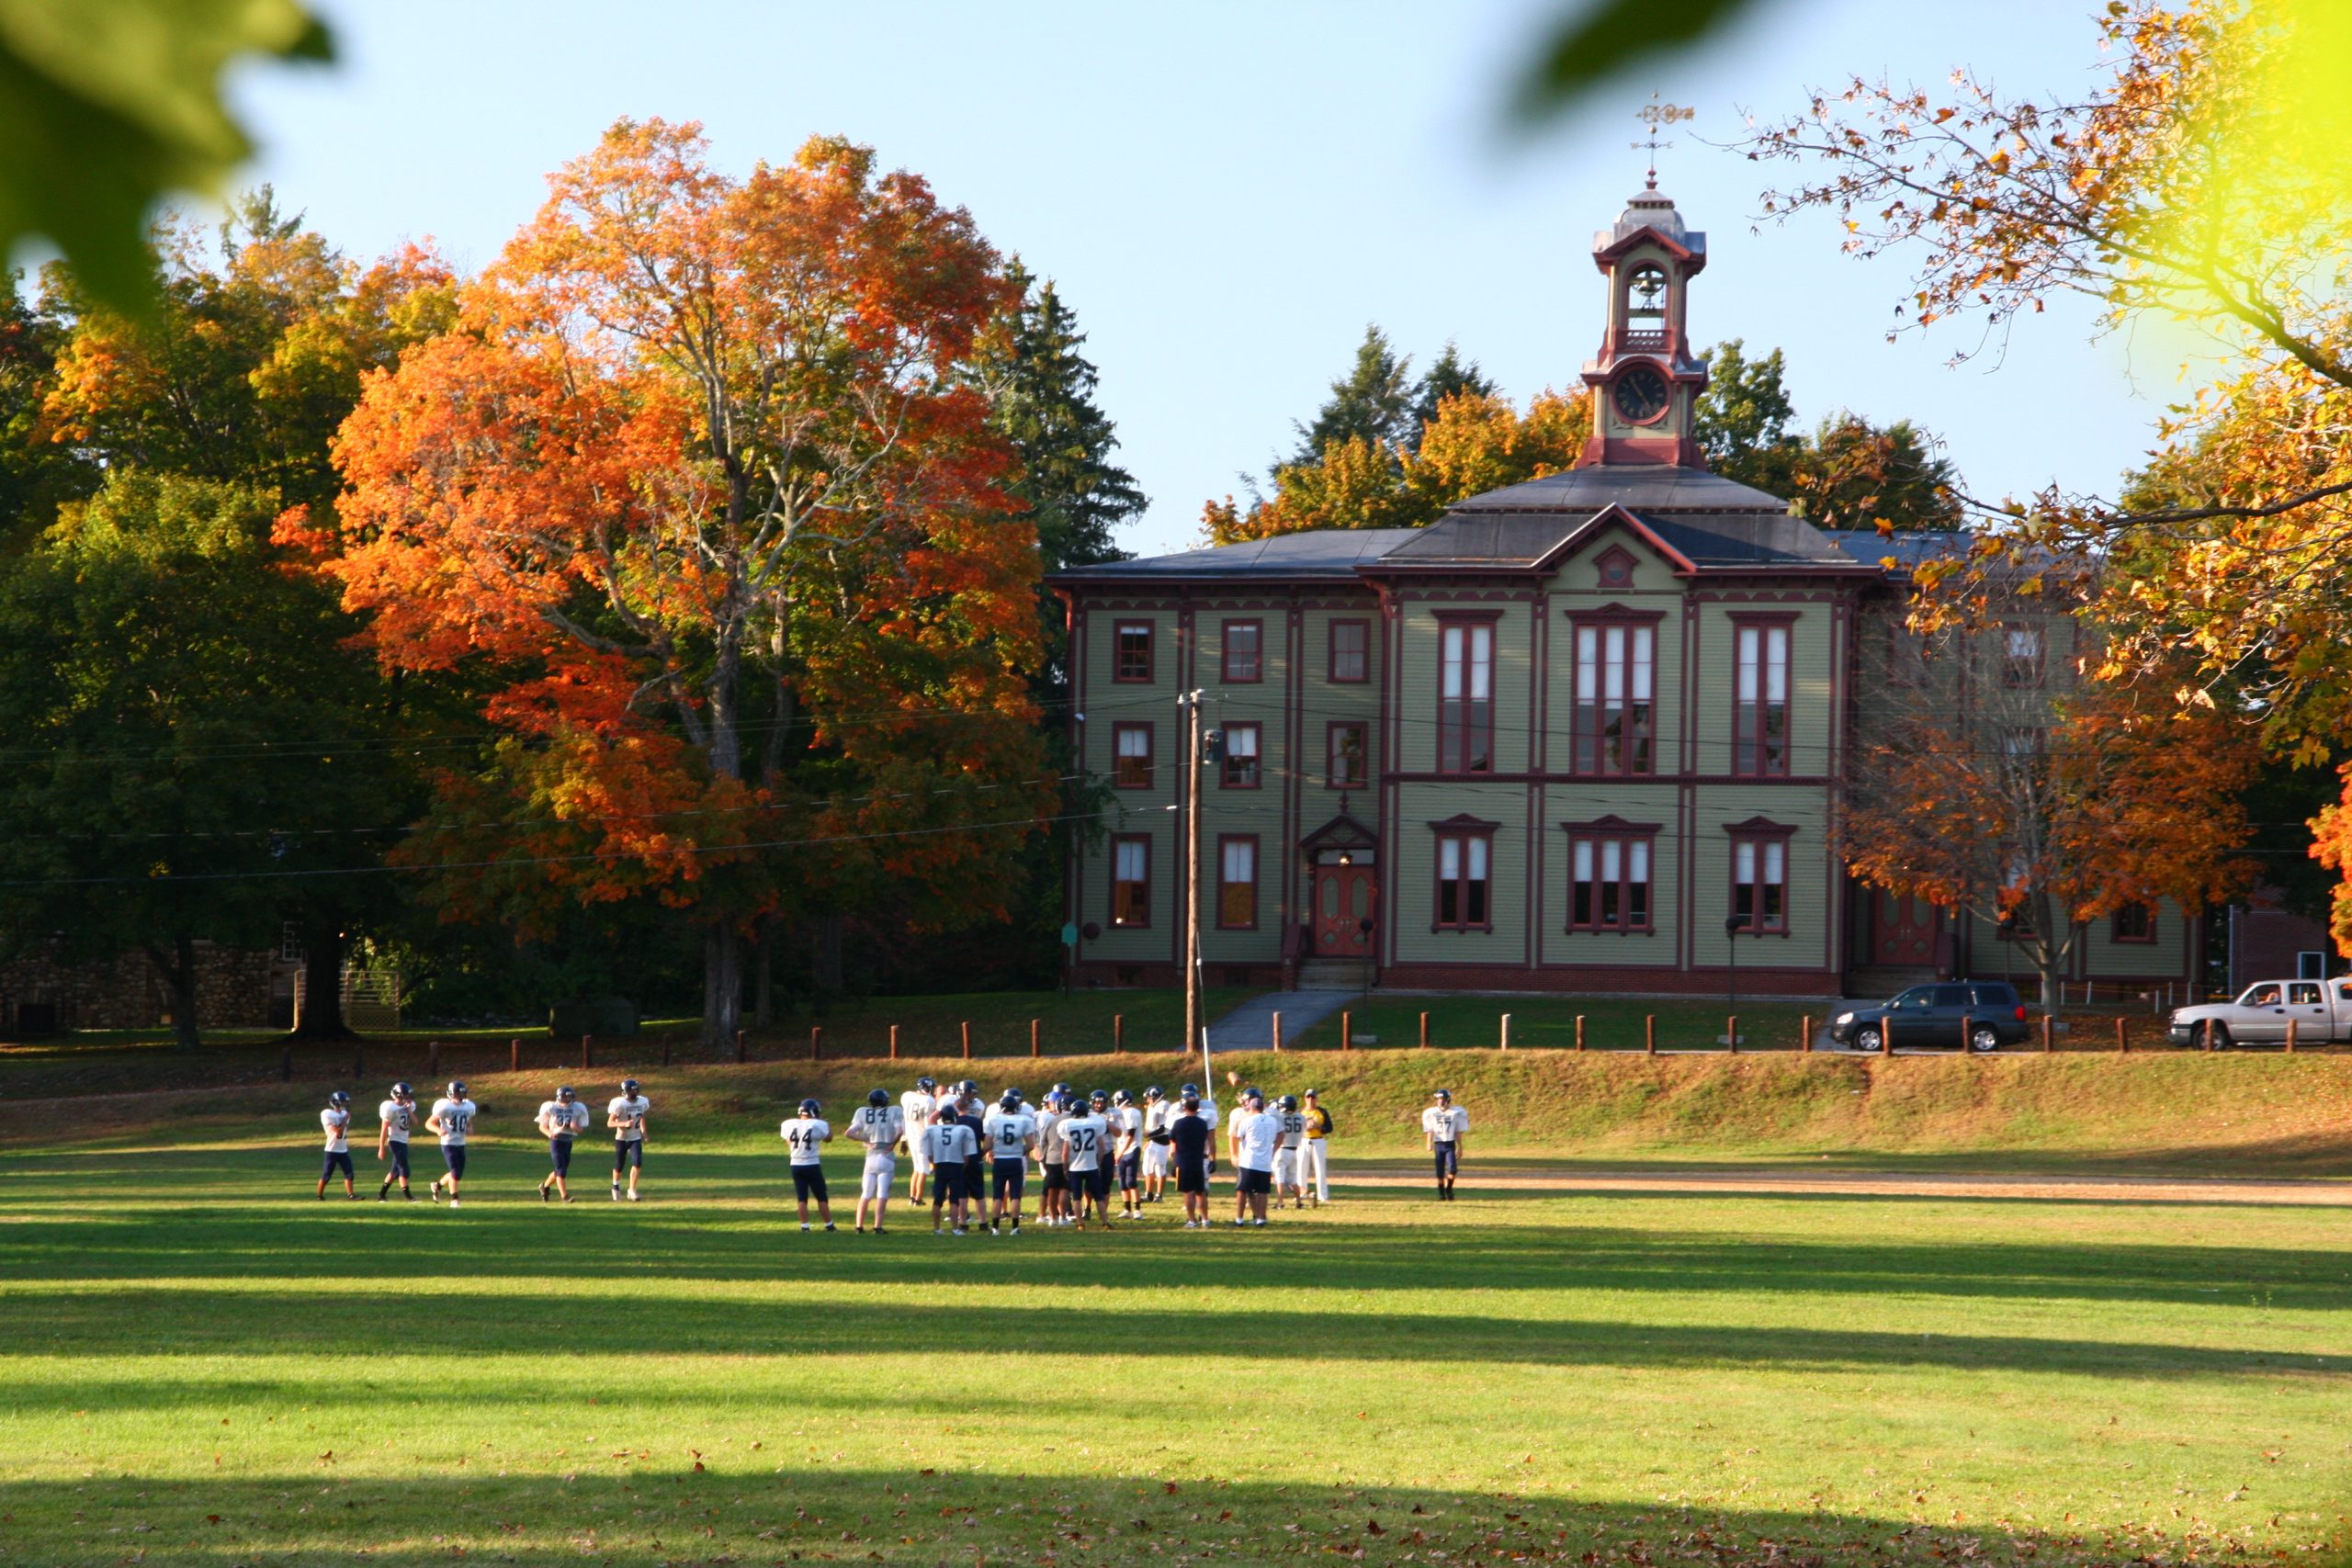 Football Practice-new England Style (user submitted)